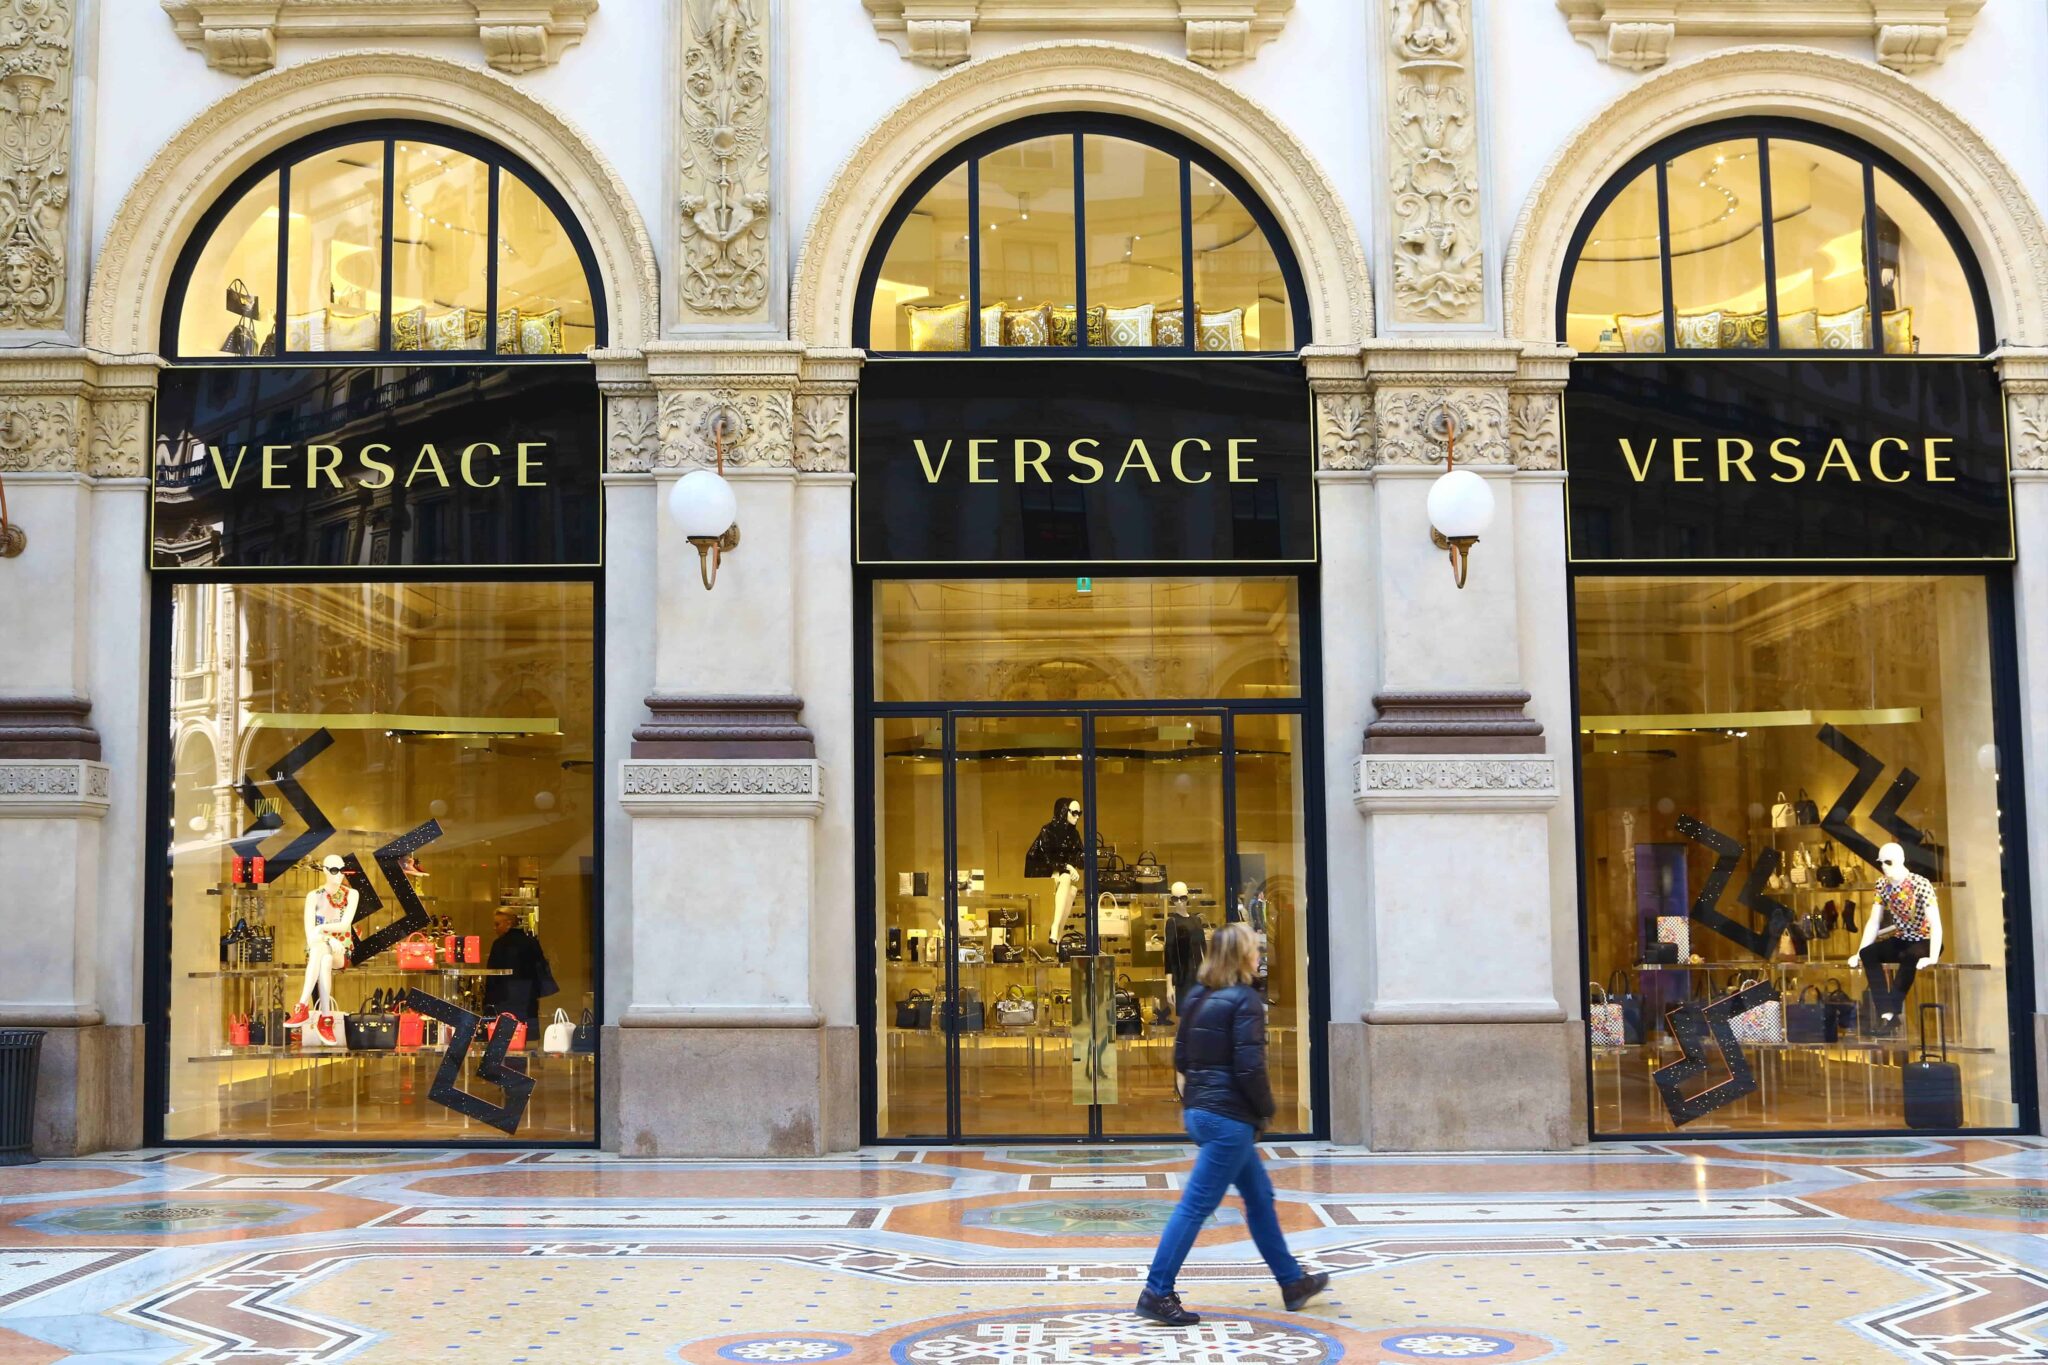 what is the difference between versus and versace